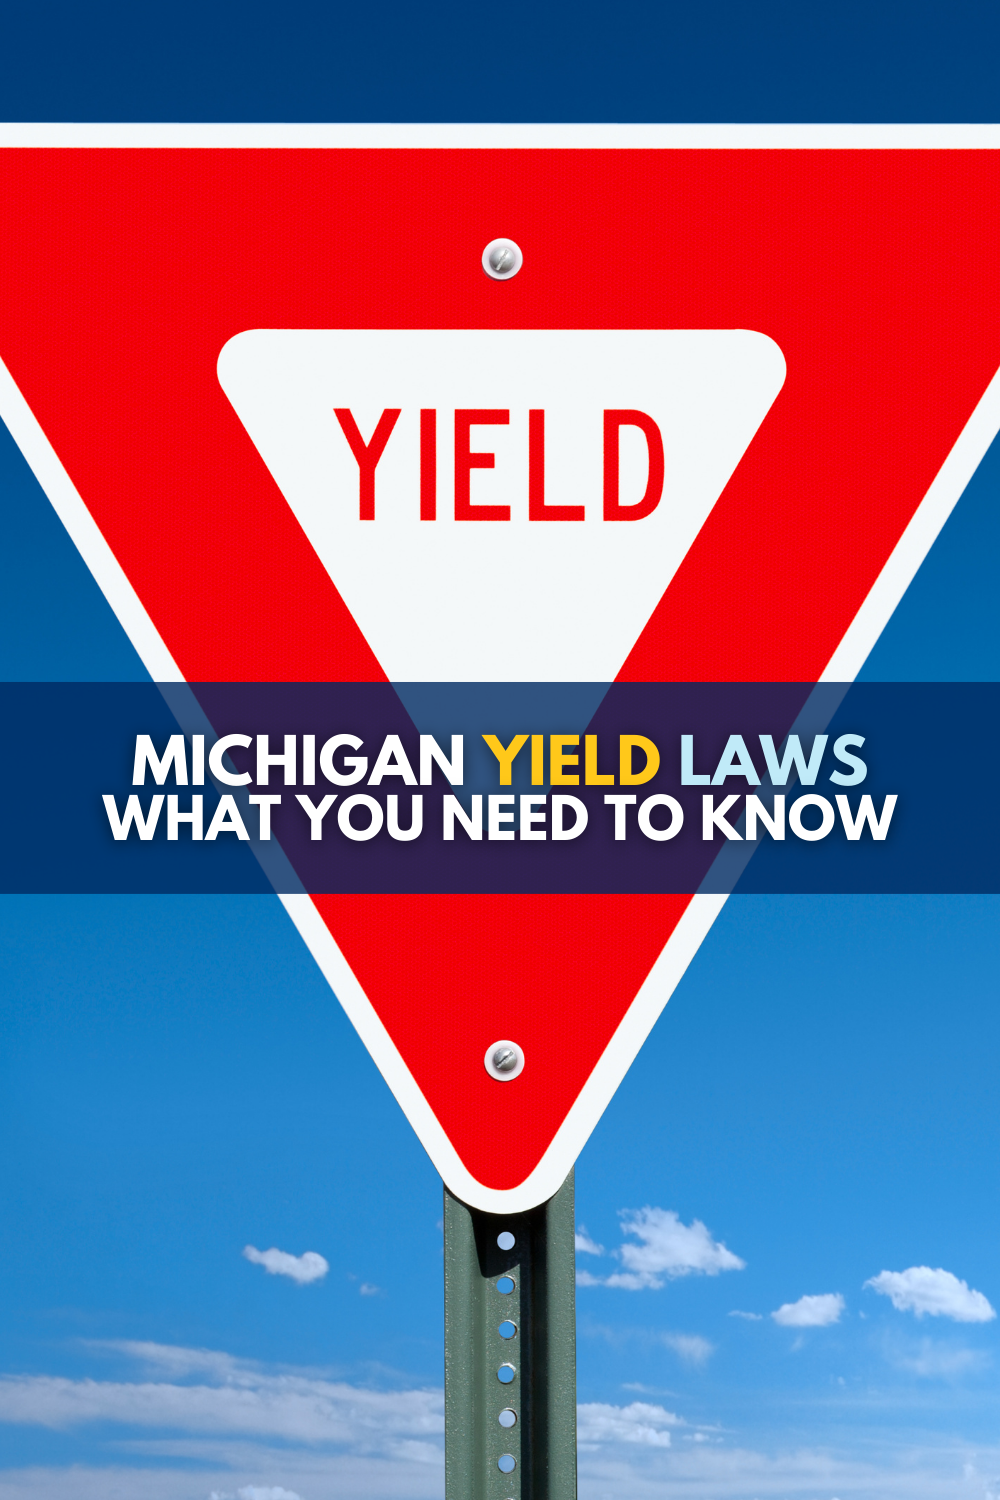 Michigan Yield Laws: What You Need To Know